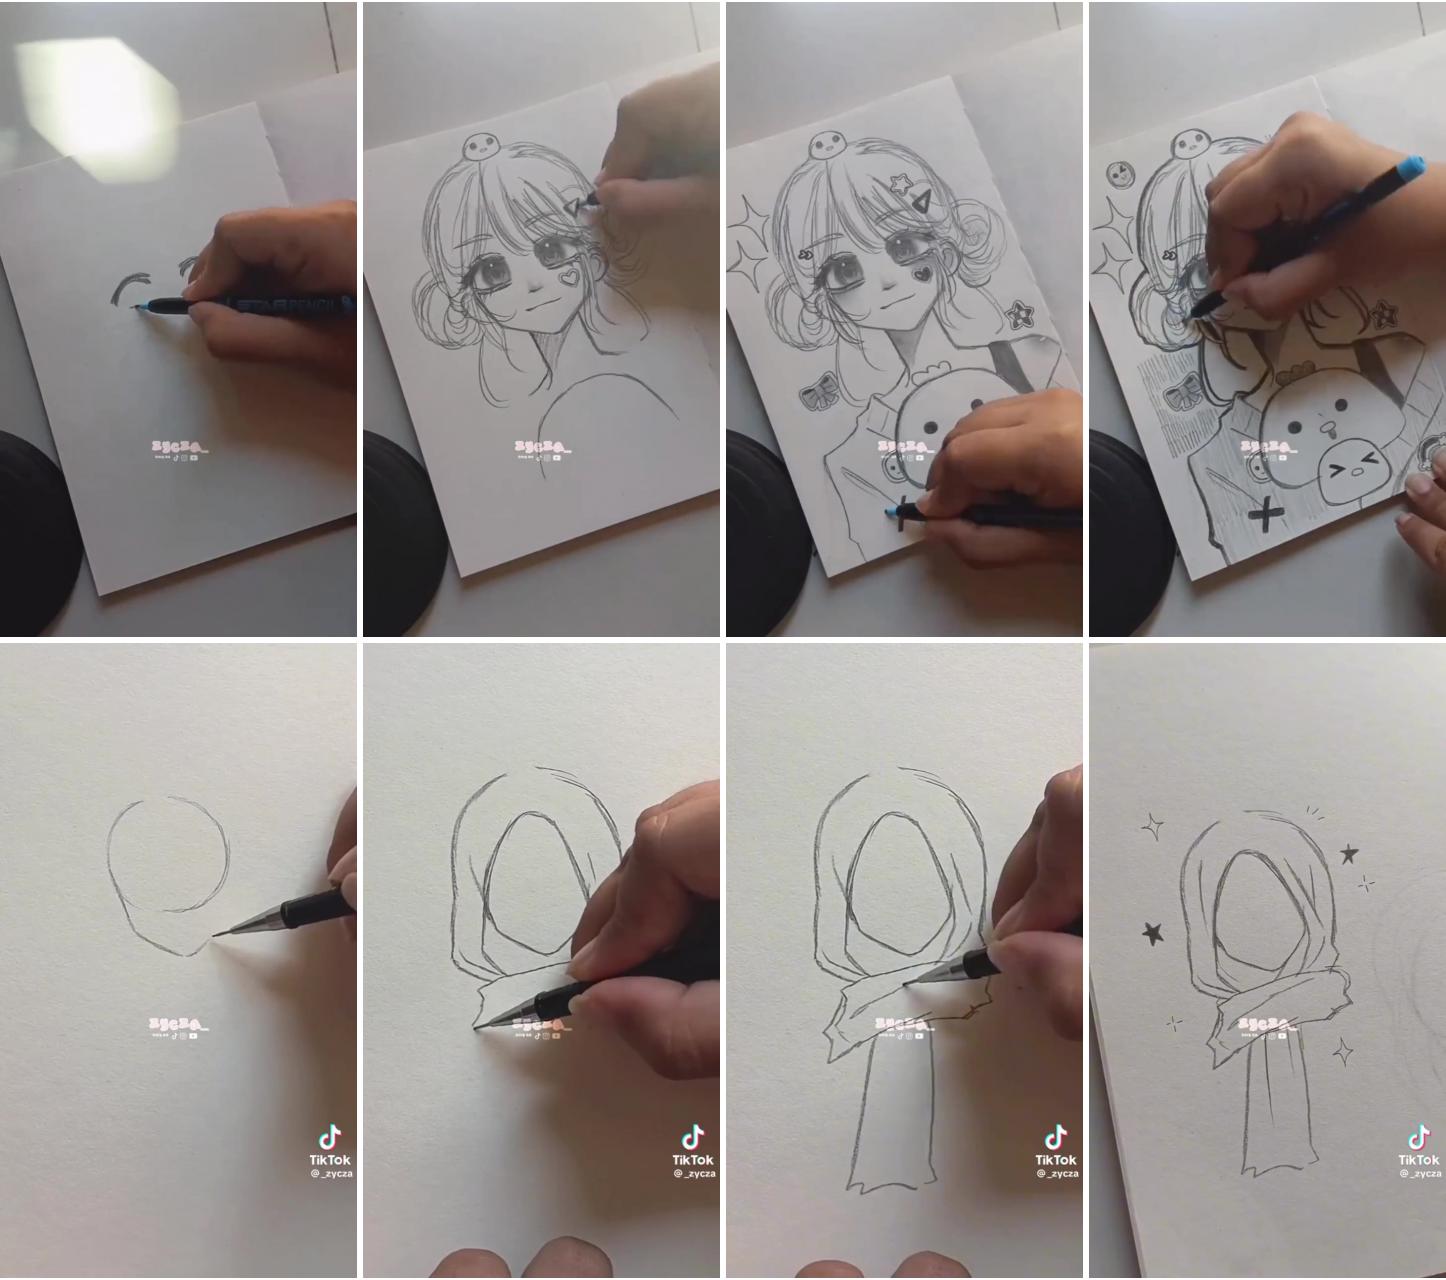 I believe the original account is "awa" go check her out btw she only on tiktok | drawing